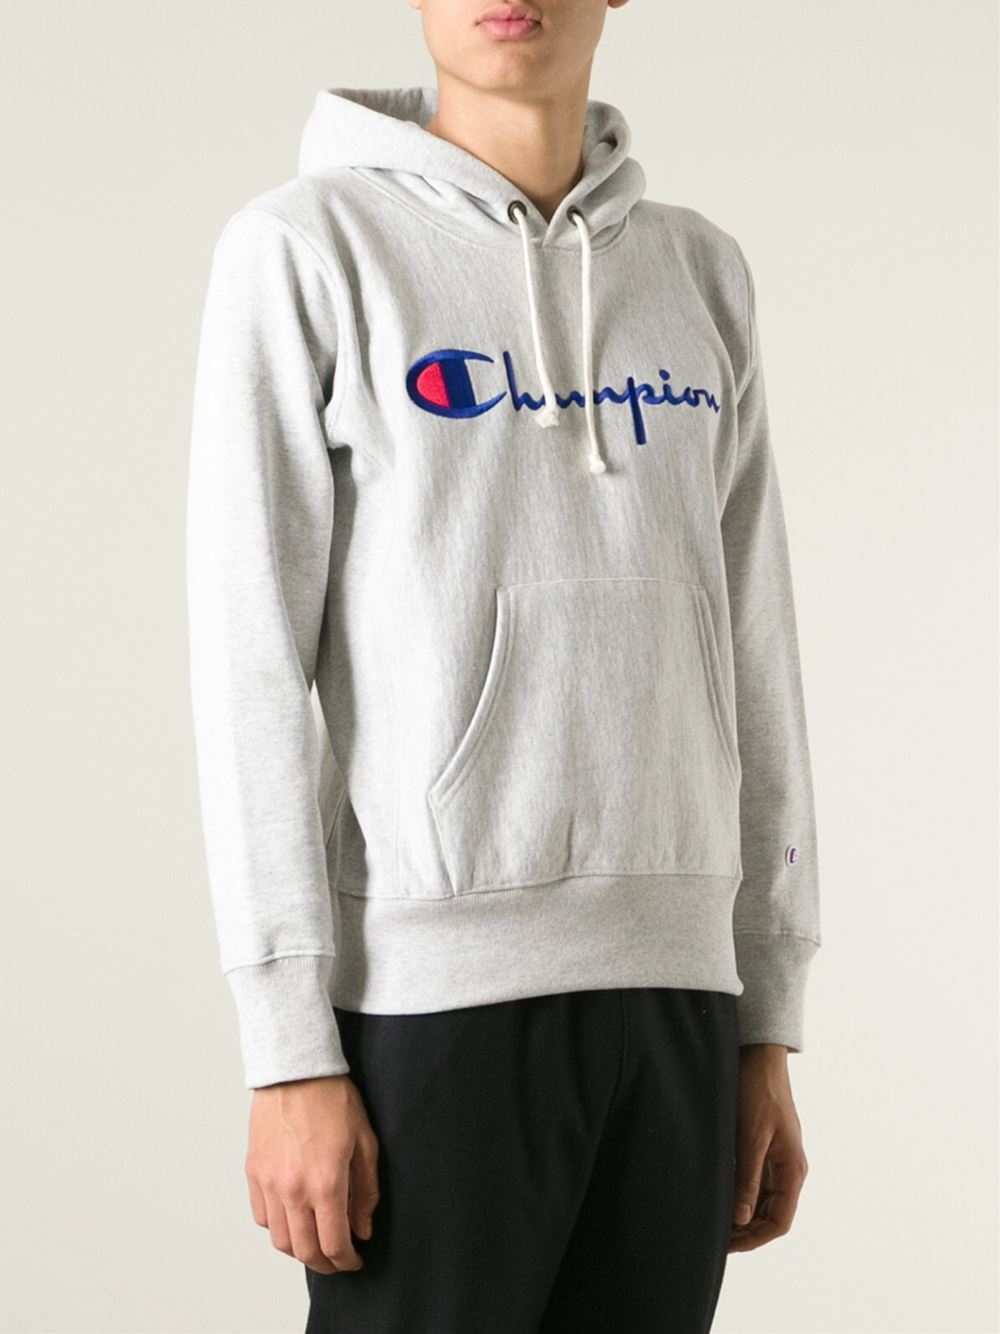 grey and blue champion hoodie